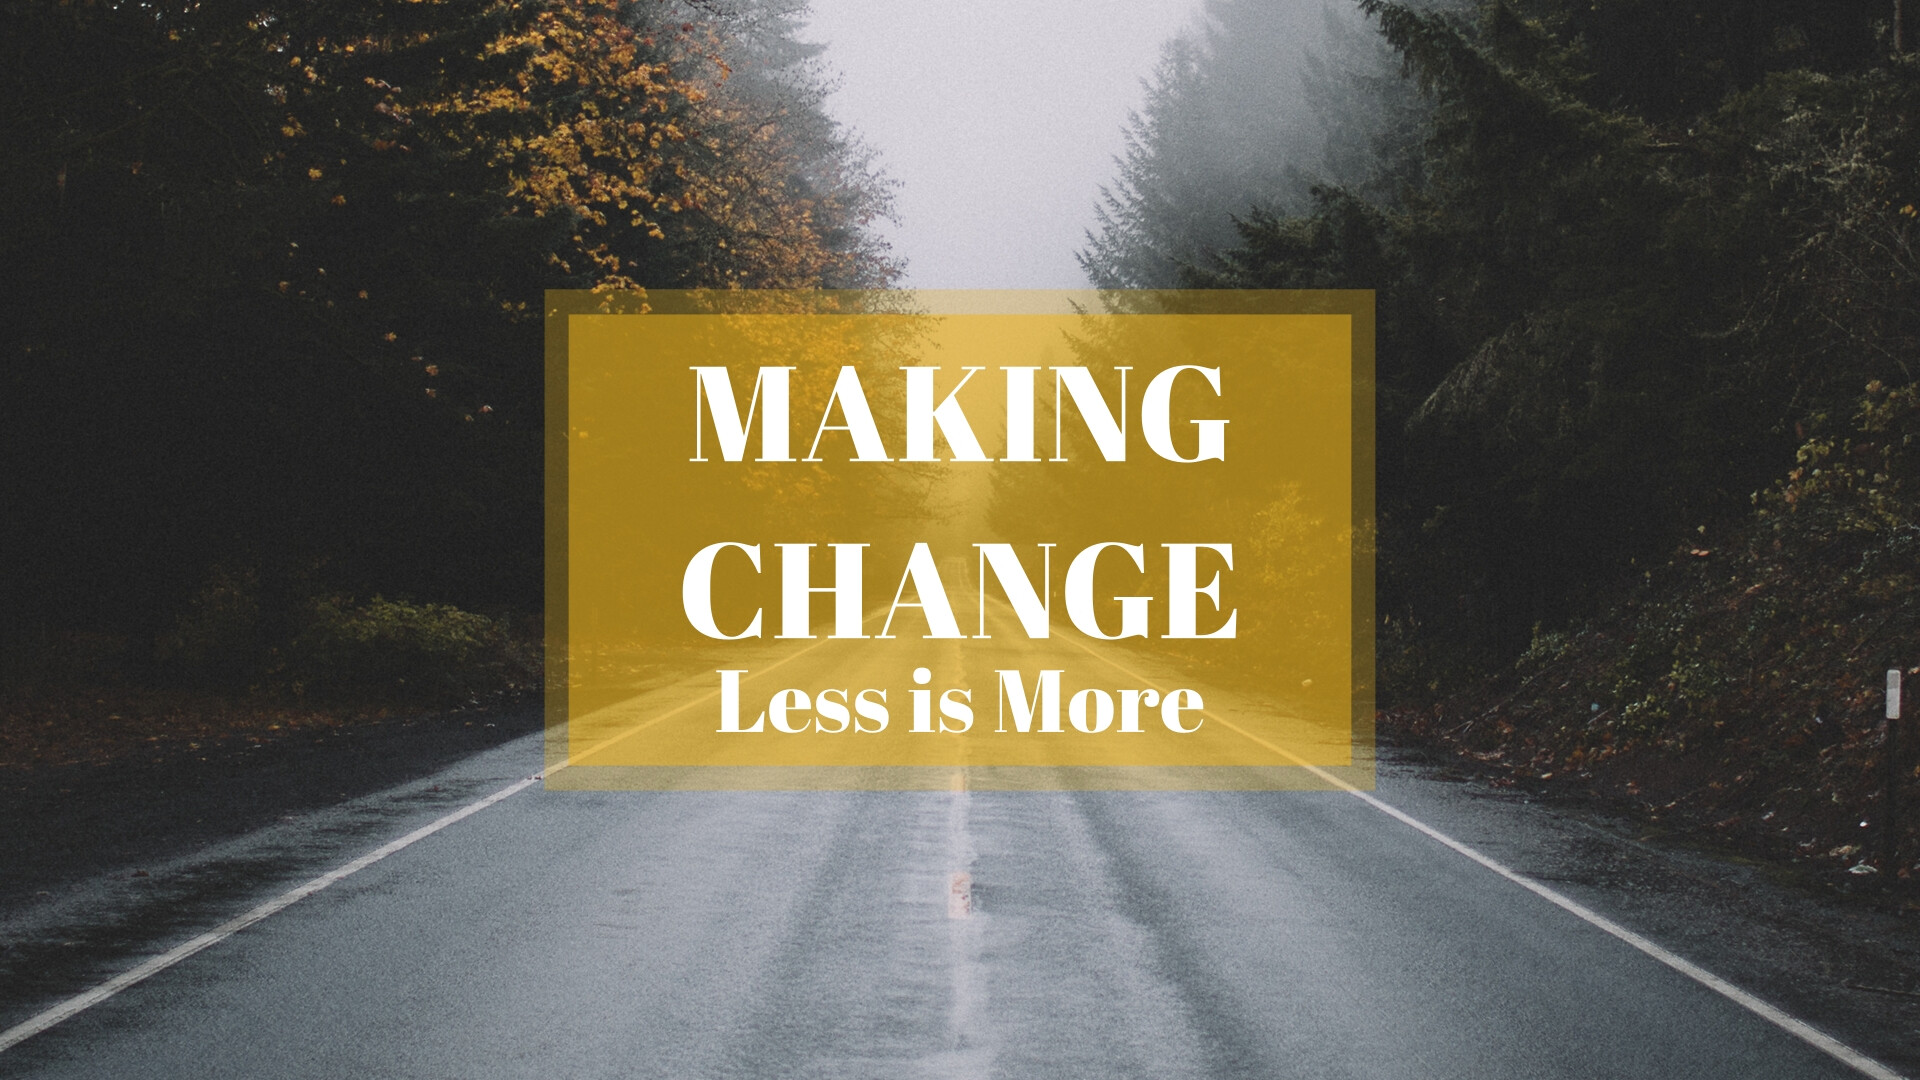 Making Change: Less is More